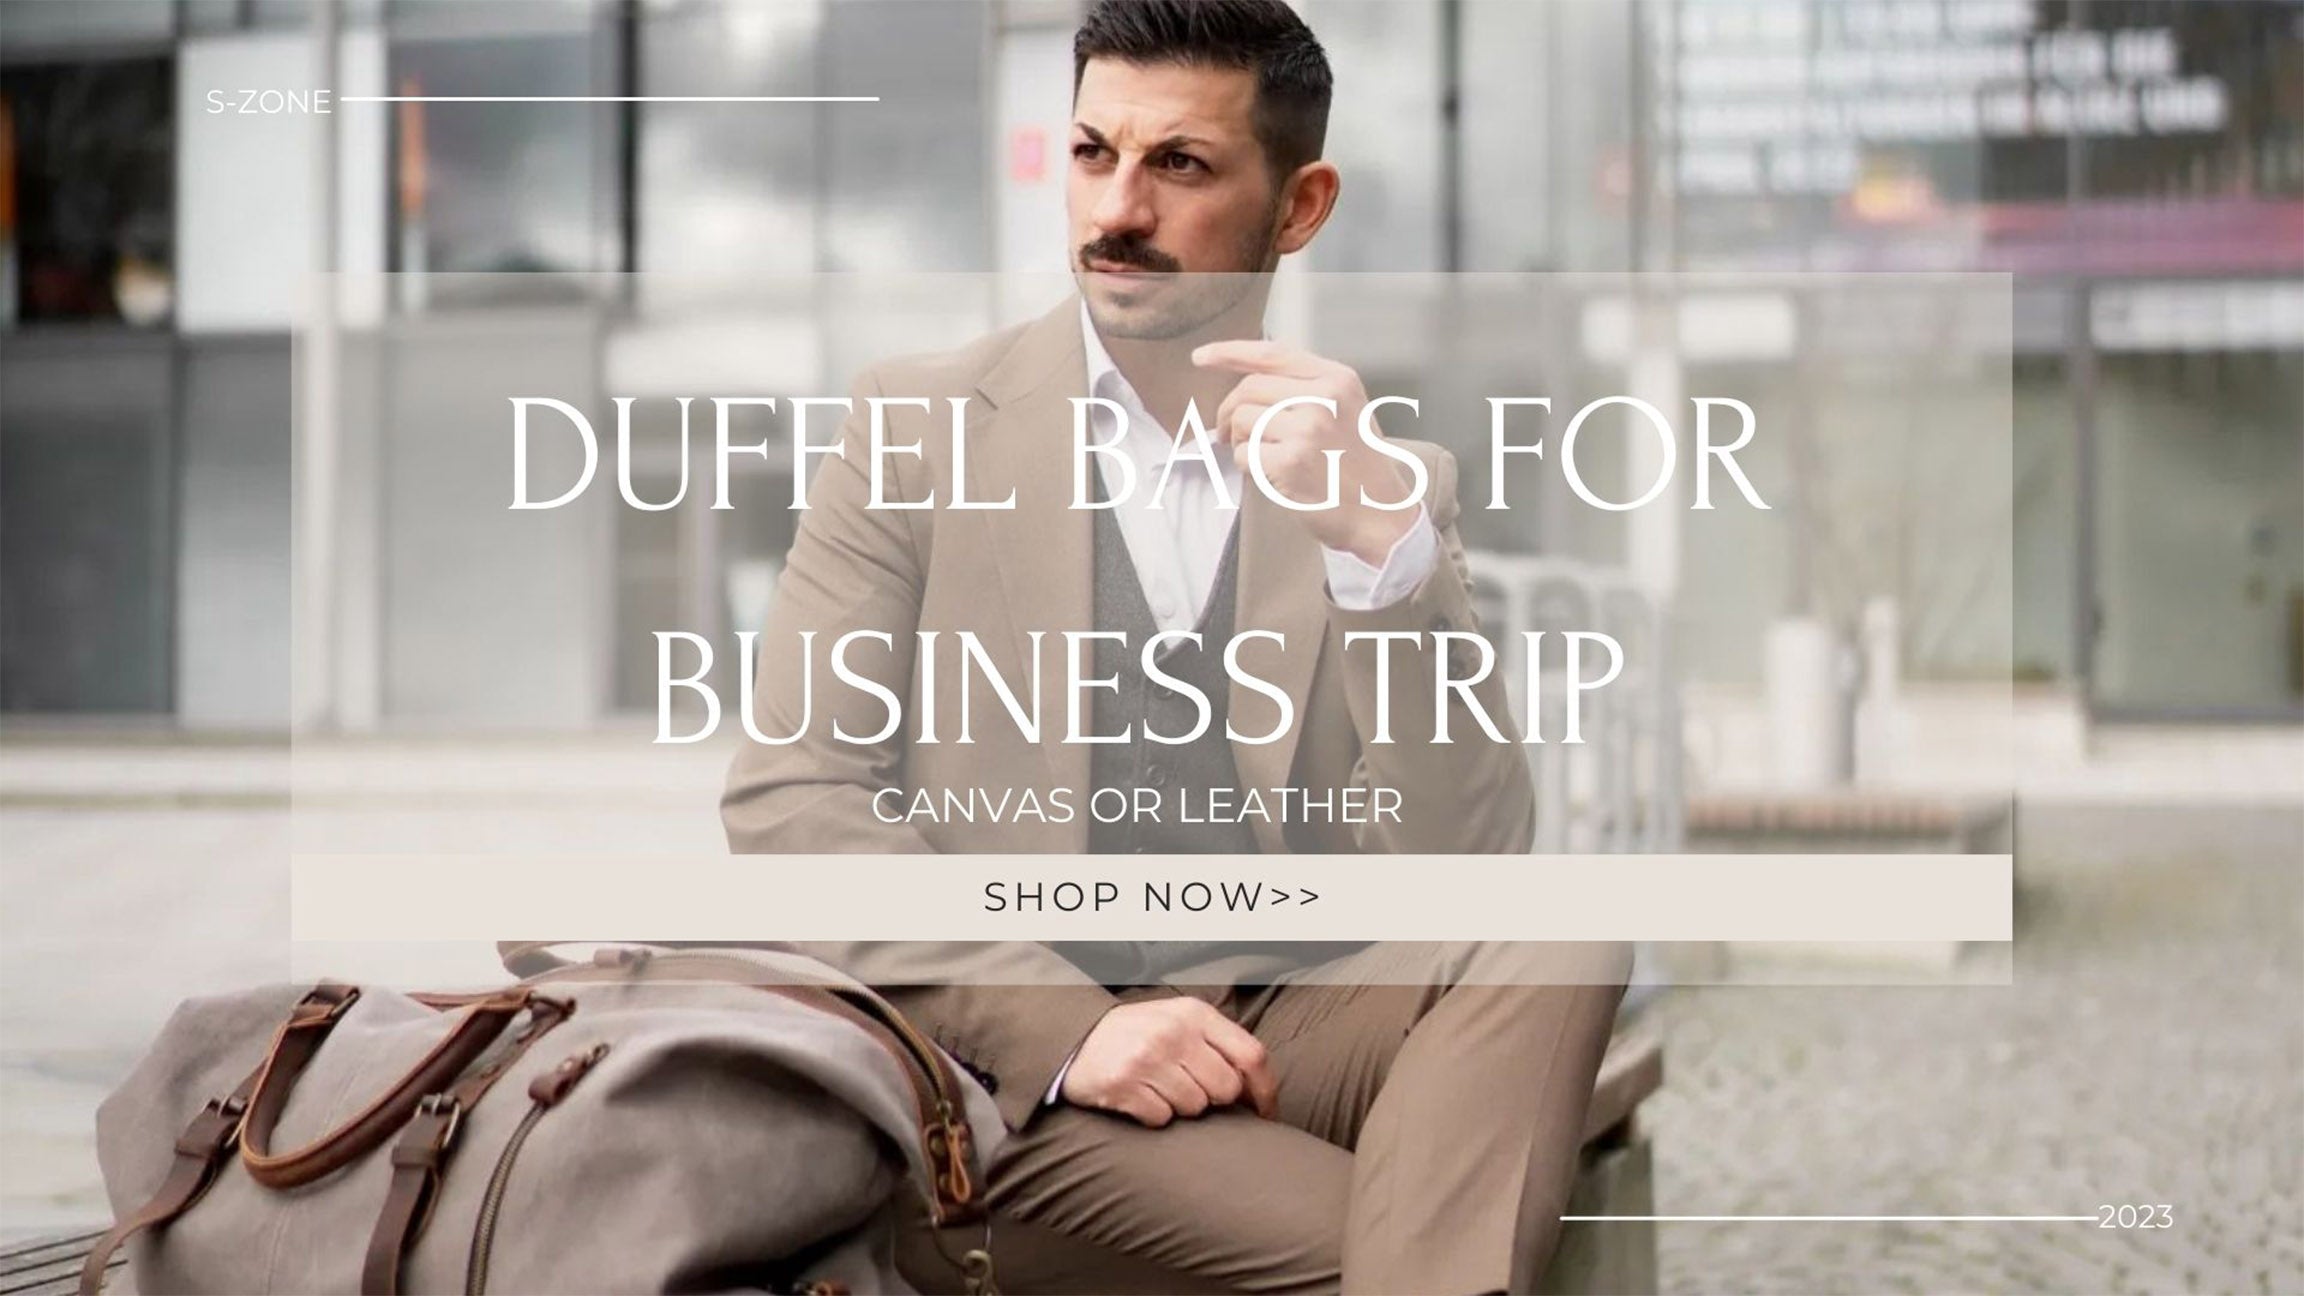 THE BEST DUFFEL BAGS FOR BUSINESS TRIP